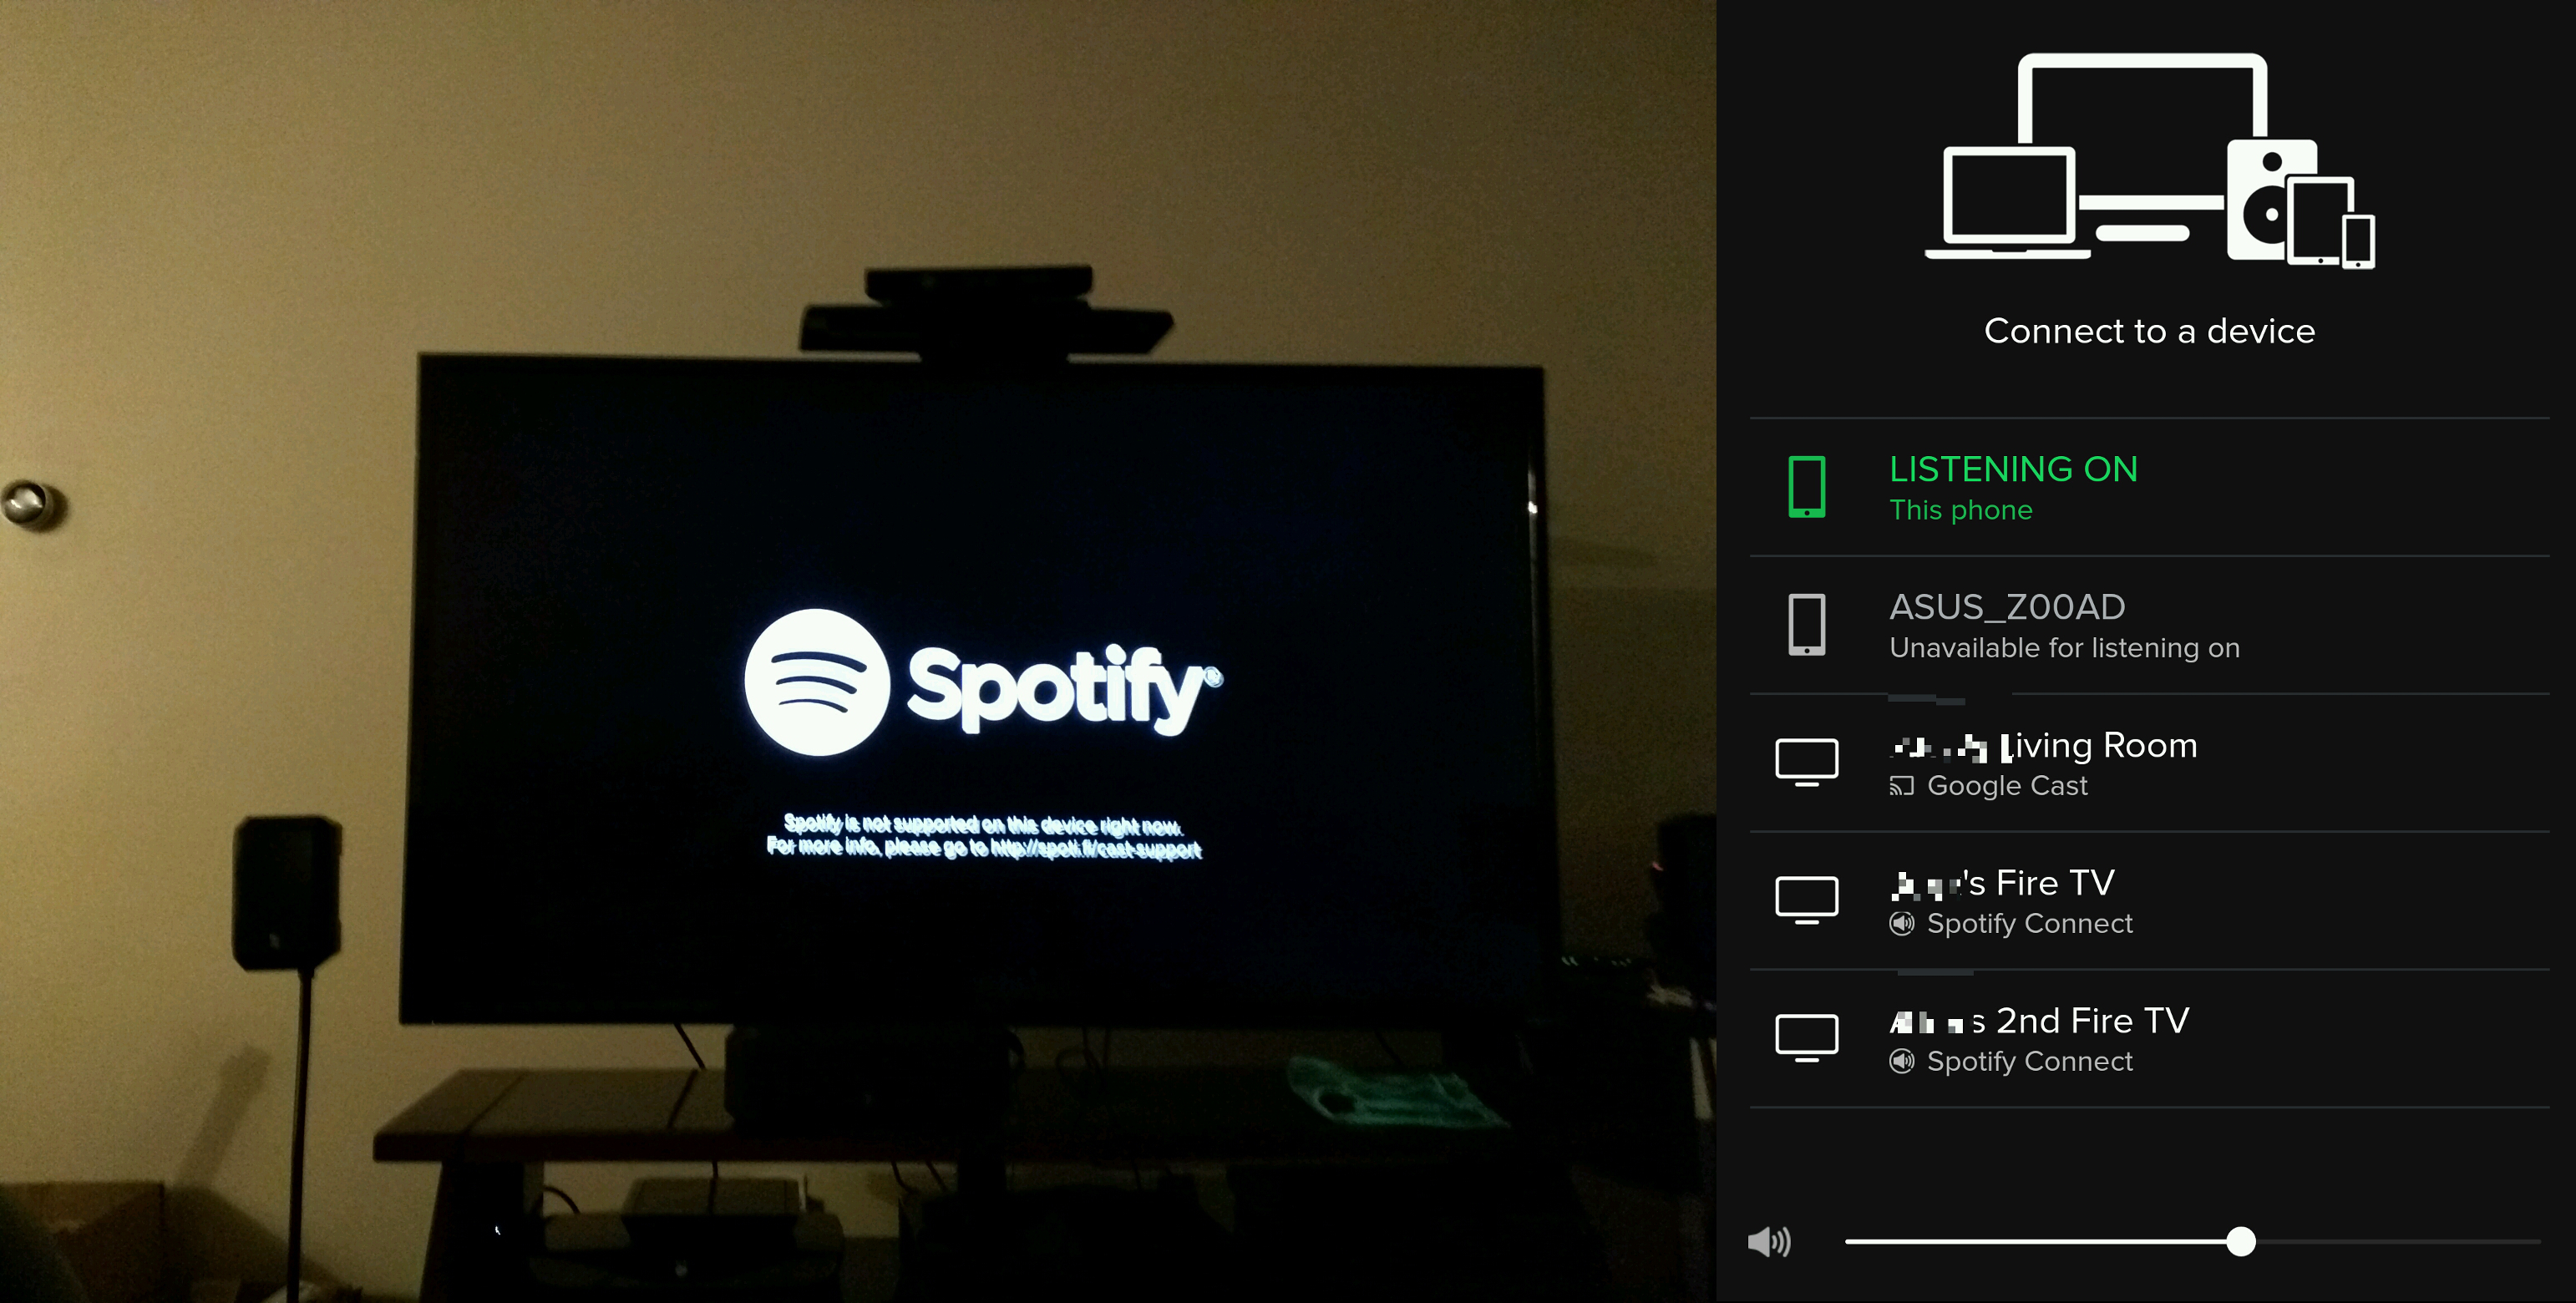 Constituir Odiseo histórico Some users already noticing Chromecast support in the Spotify Android app